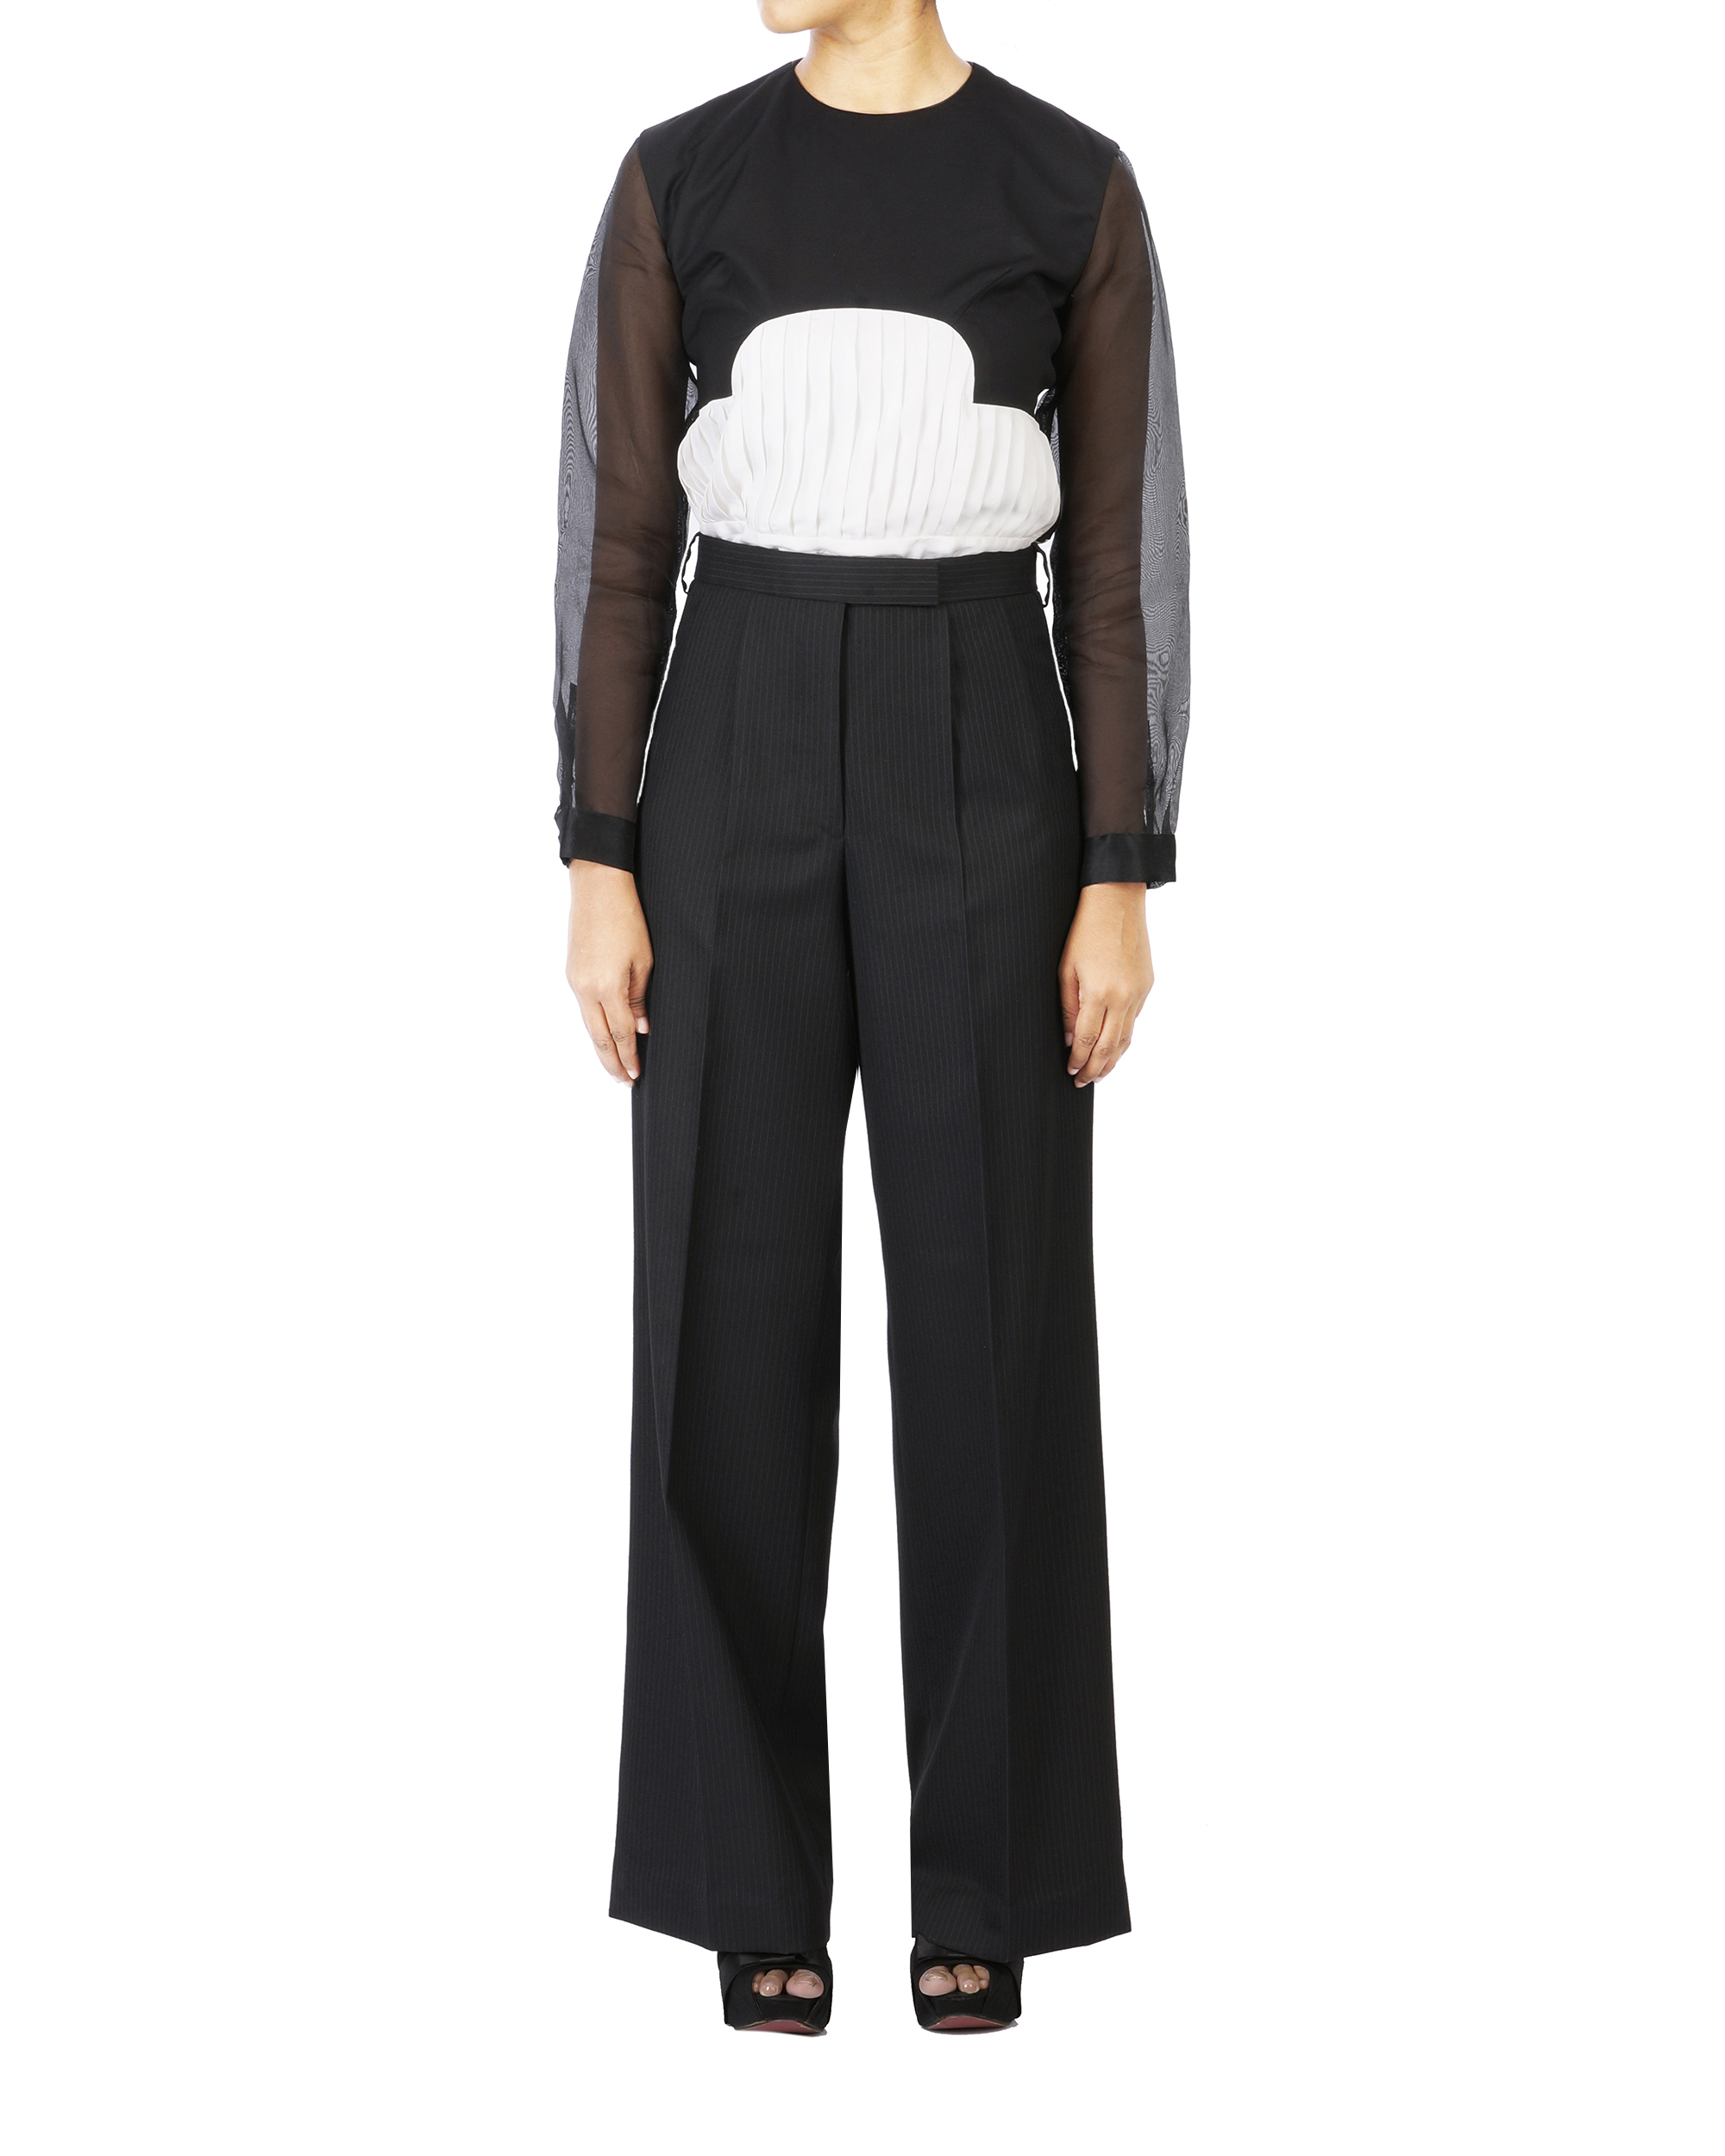 Angela rose high-waist pant by Six Buttons Down | The Secret Label